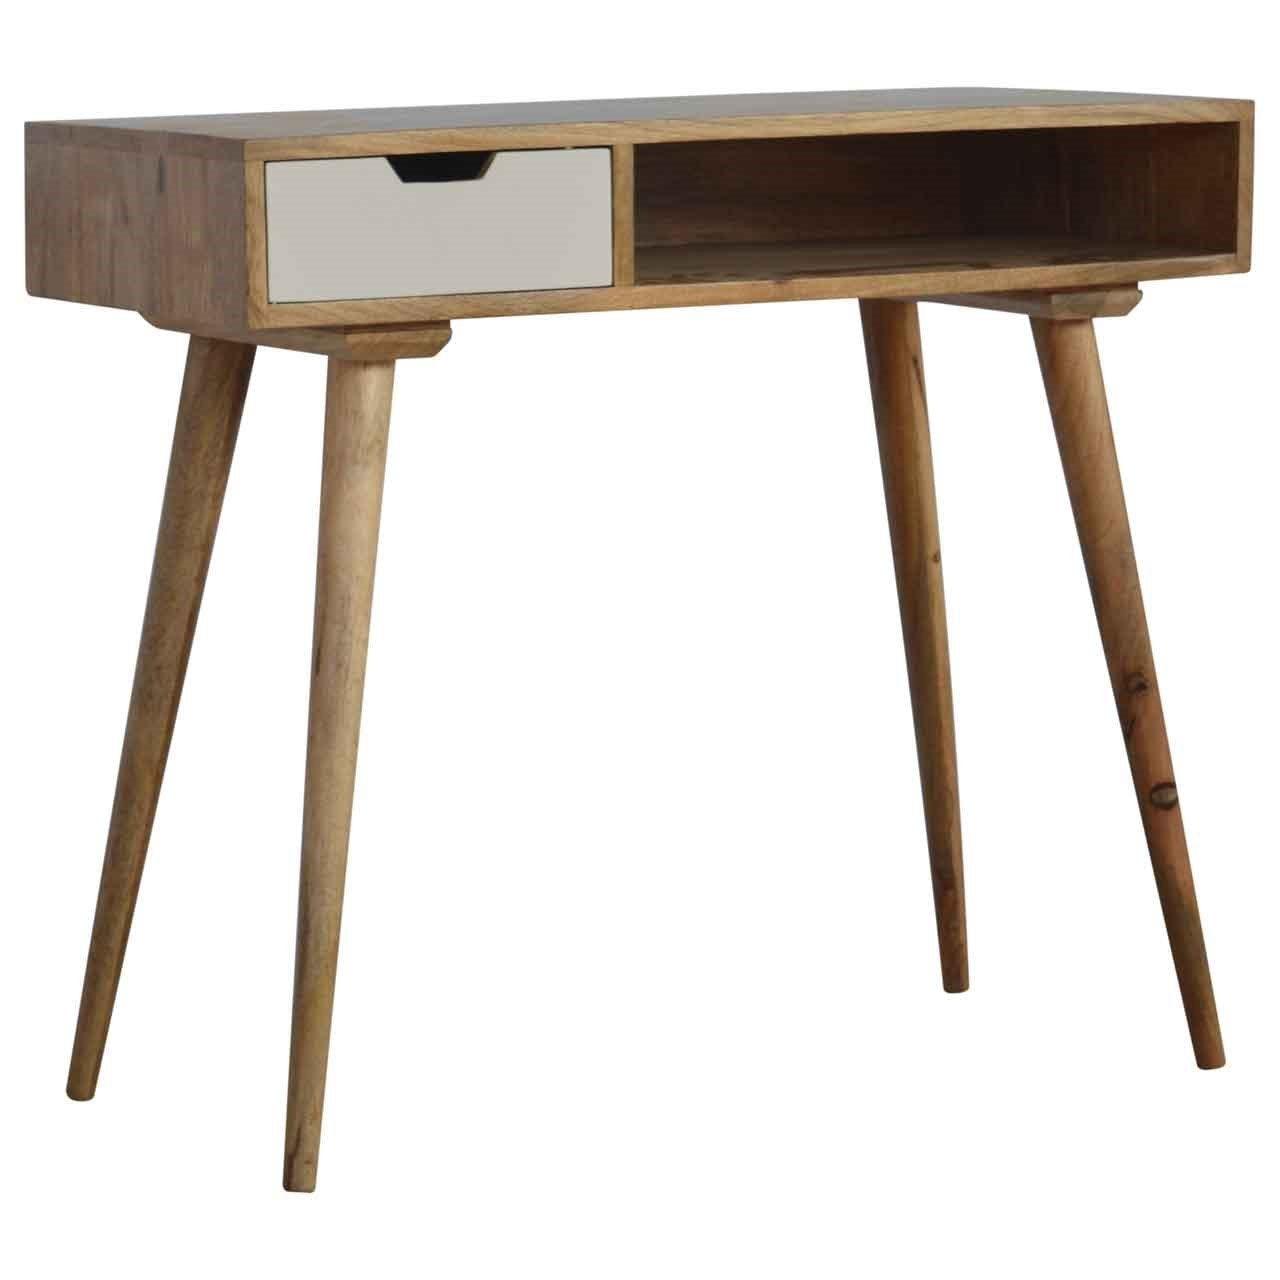 Home office writing desk with hand painted drawer - crimblefest furniture - image 2